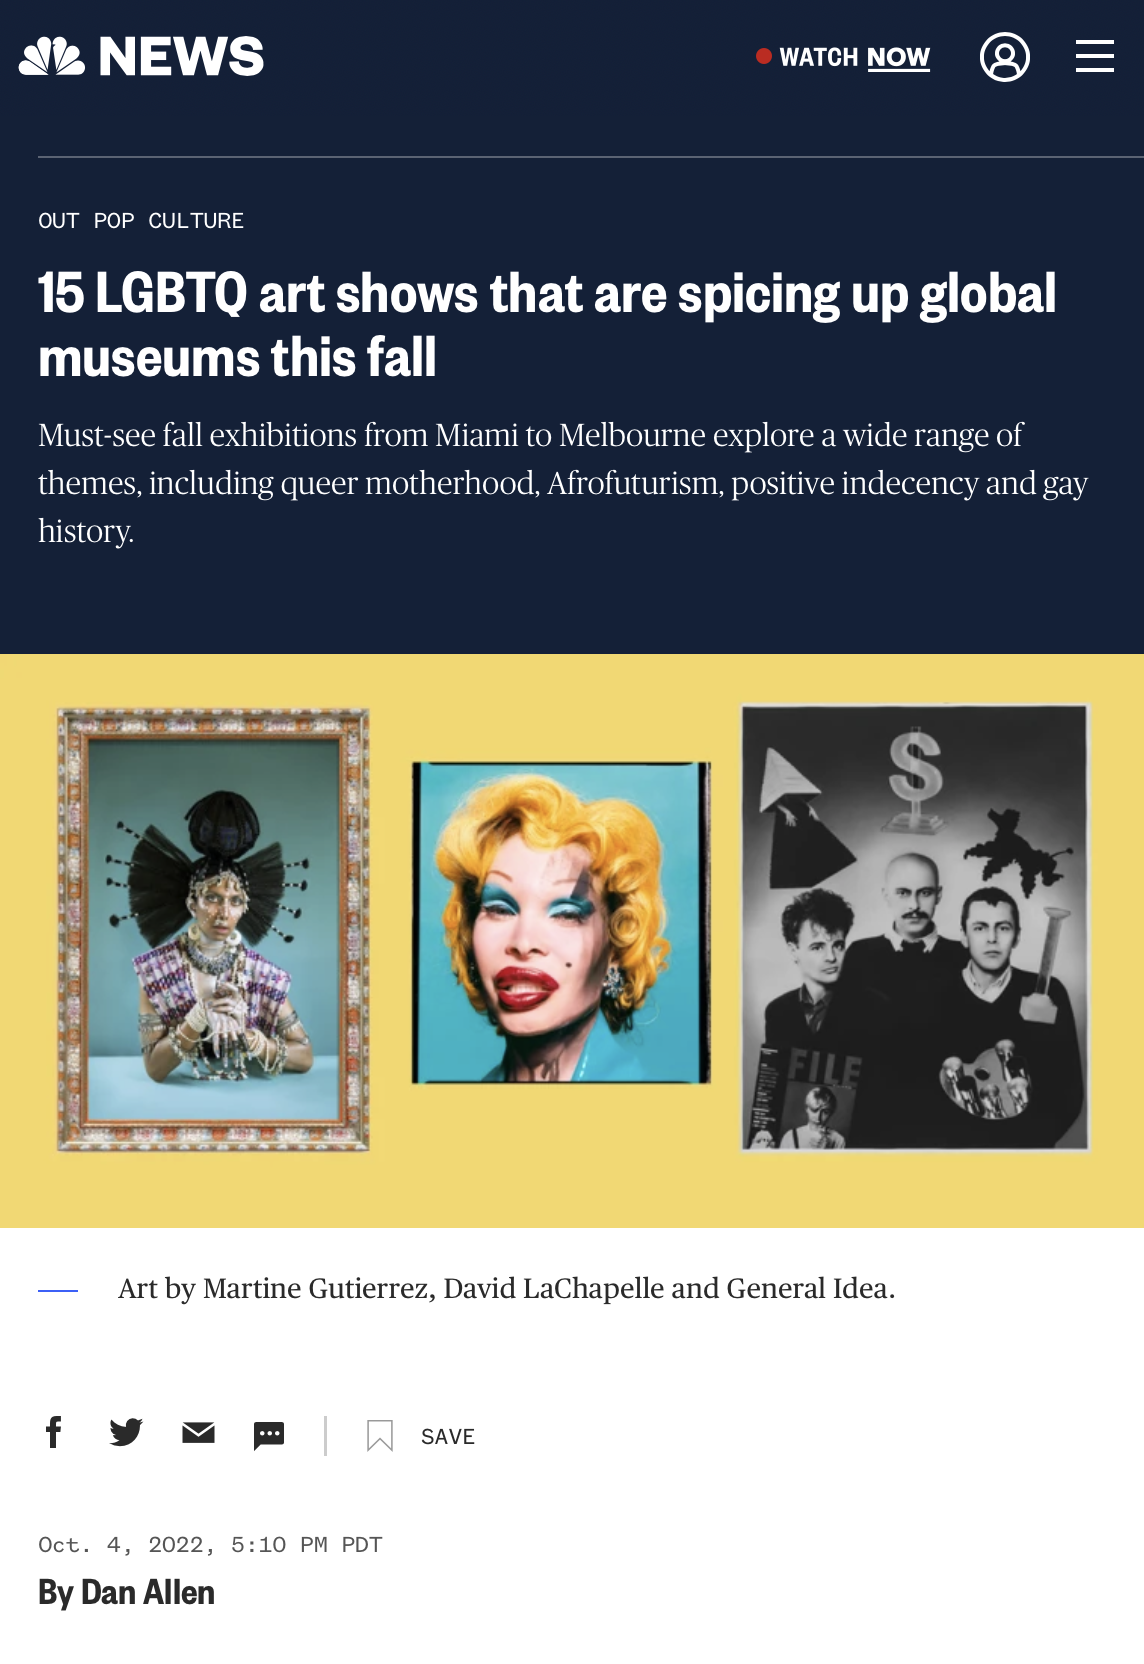 NBC News : 15 LGBTQ art shows that are spicing up global museums this fall